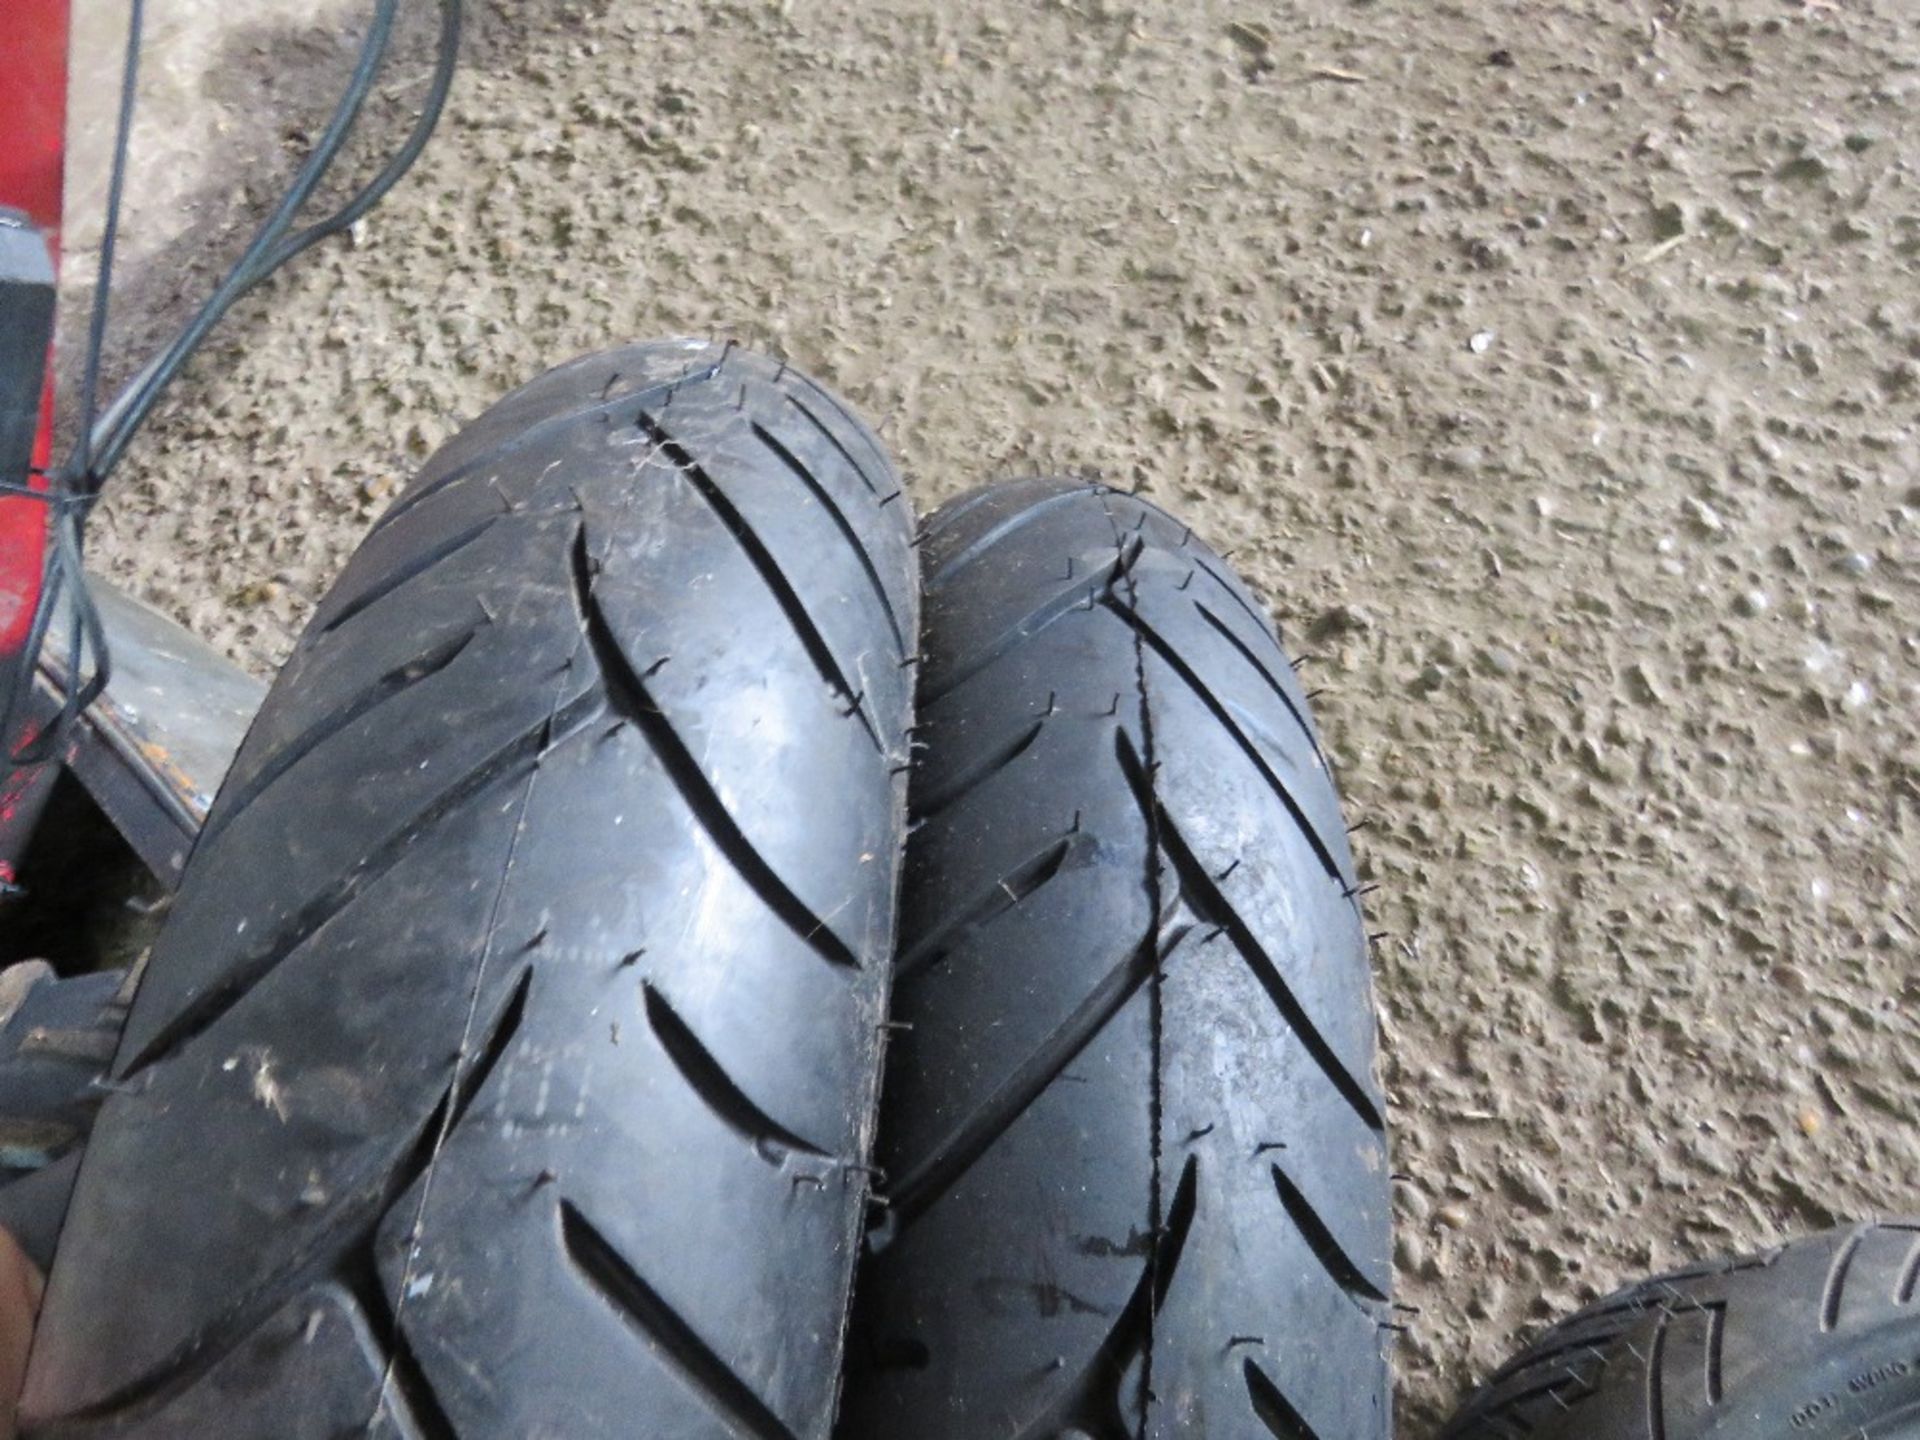 2 X DUNLOP 120/80-14 MOTORBIKE TYRES, SOURCED FROM COMPANY LIQUIDATION. THIS LOT IS SOLD UNDER THE A